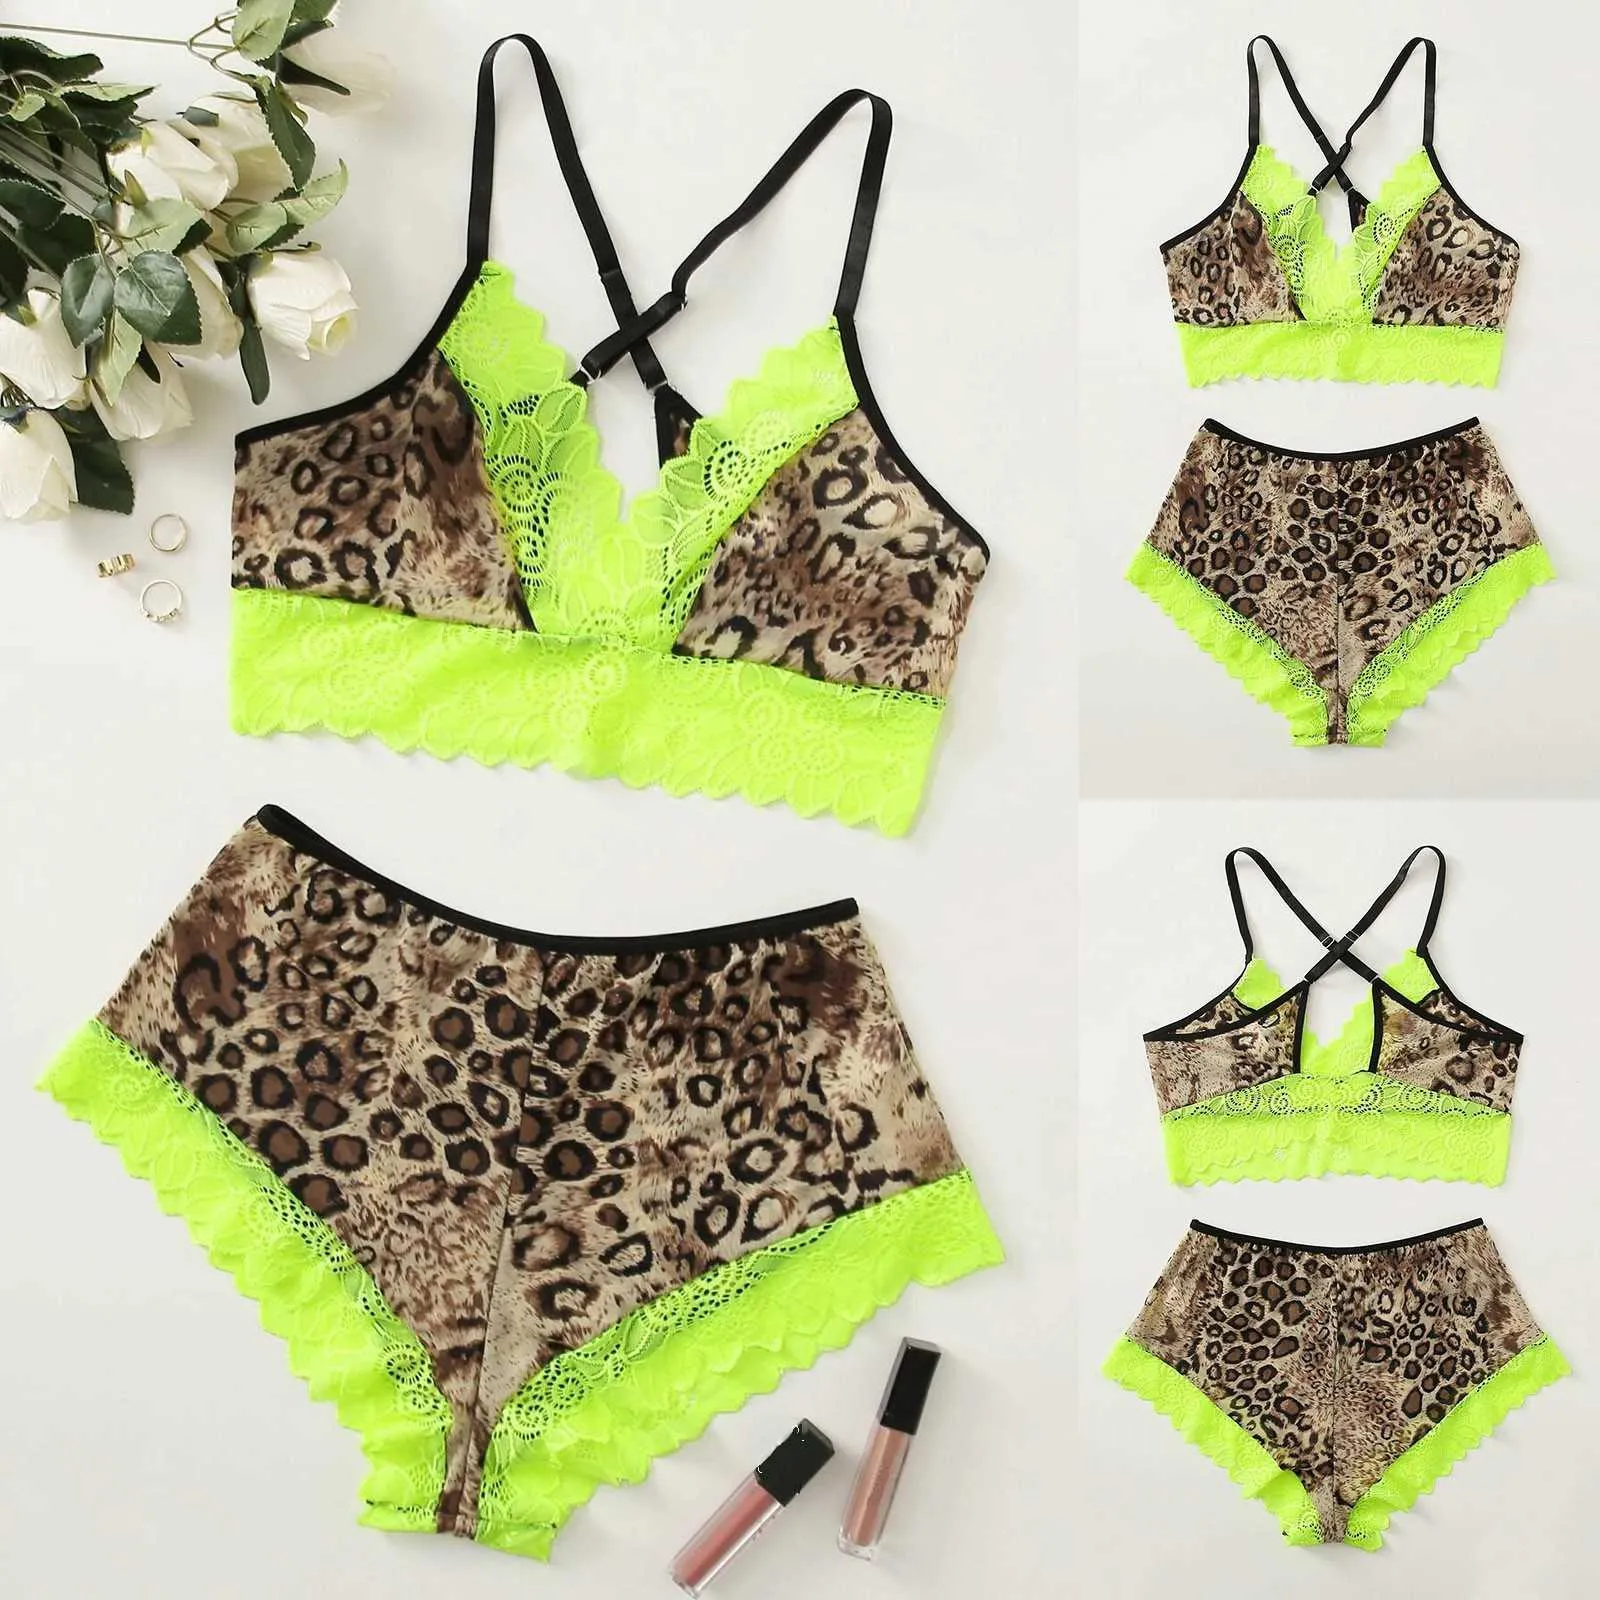 Lace Sleepwear Menina For Women Sexy Lingerie Leopard Print Tops And Shorts Sets Pajamas Nightwear Nighty For Ladies Q0706